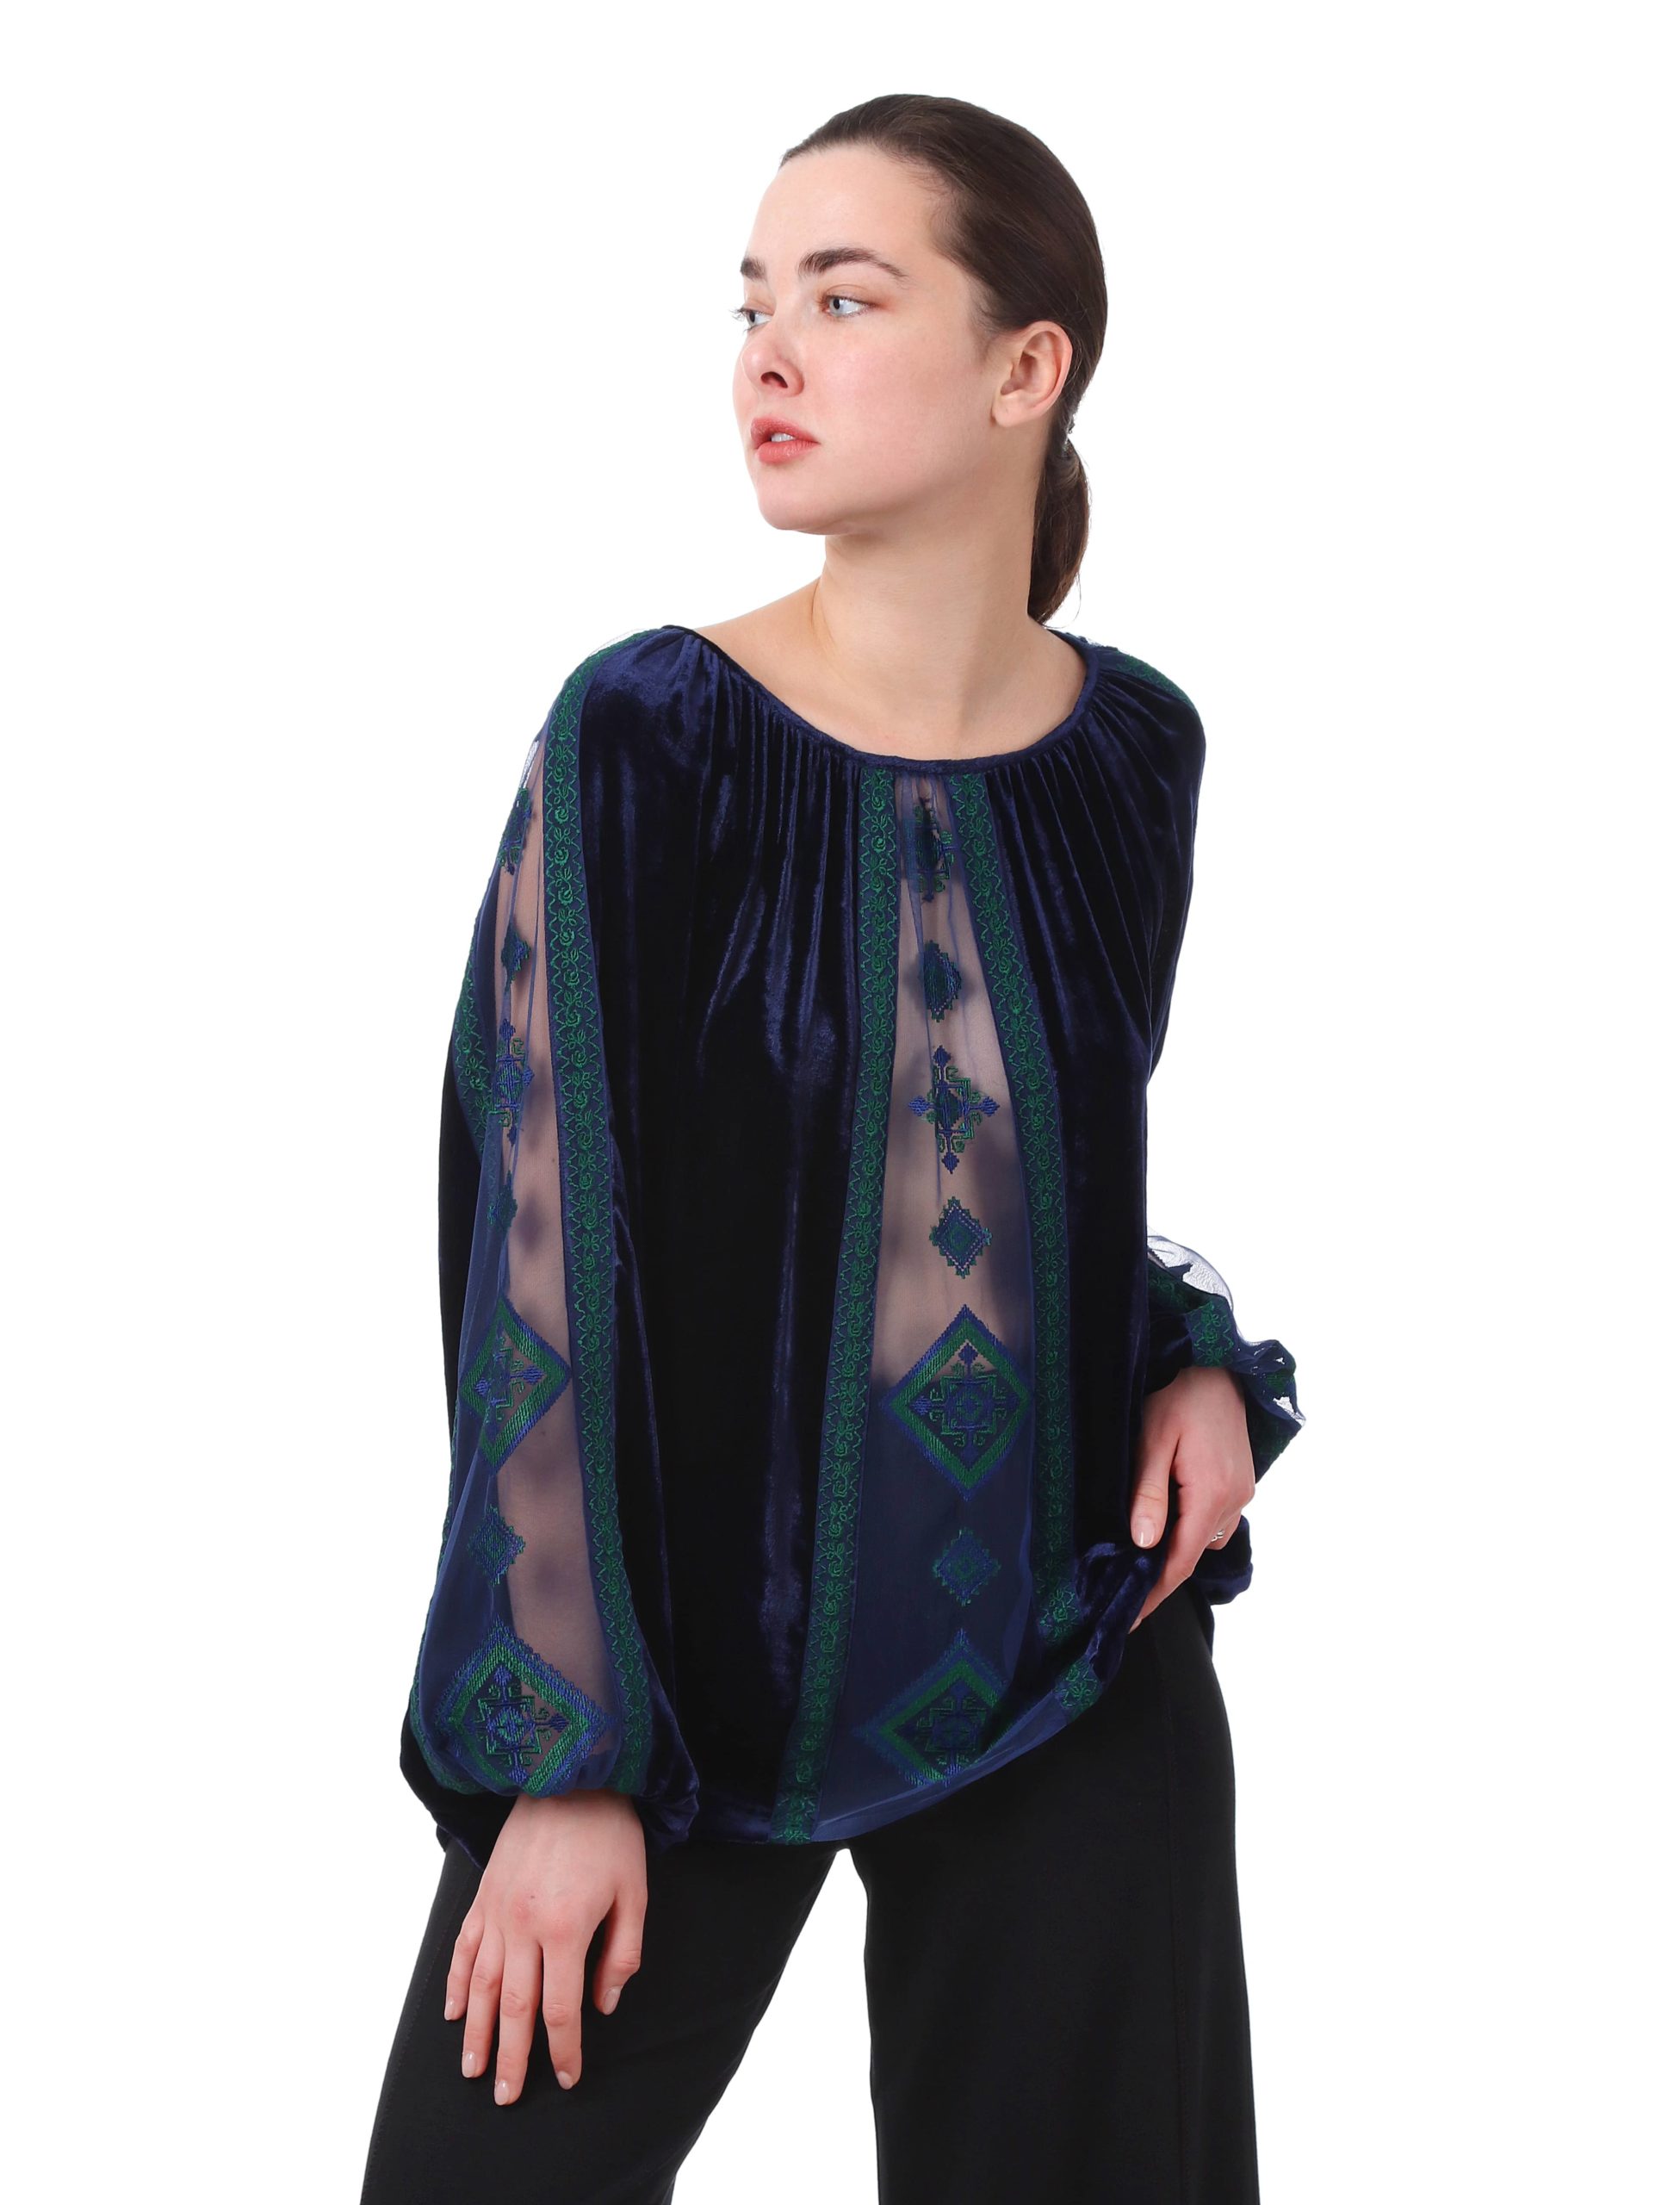 Velvet blouse with net embroidery